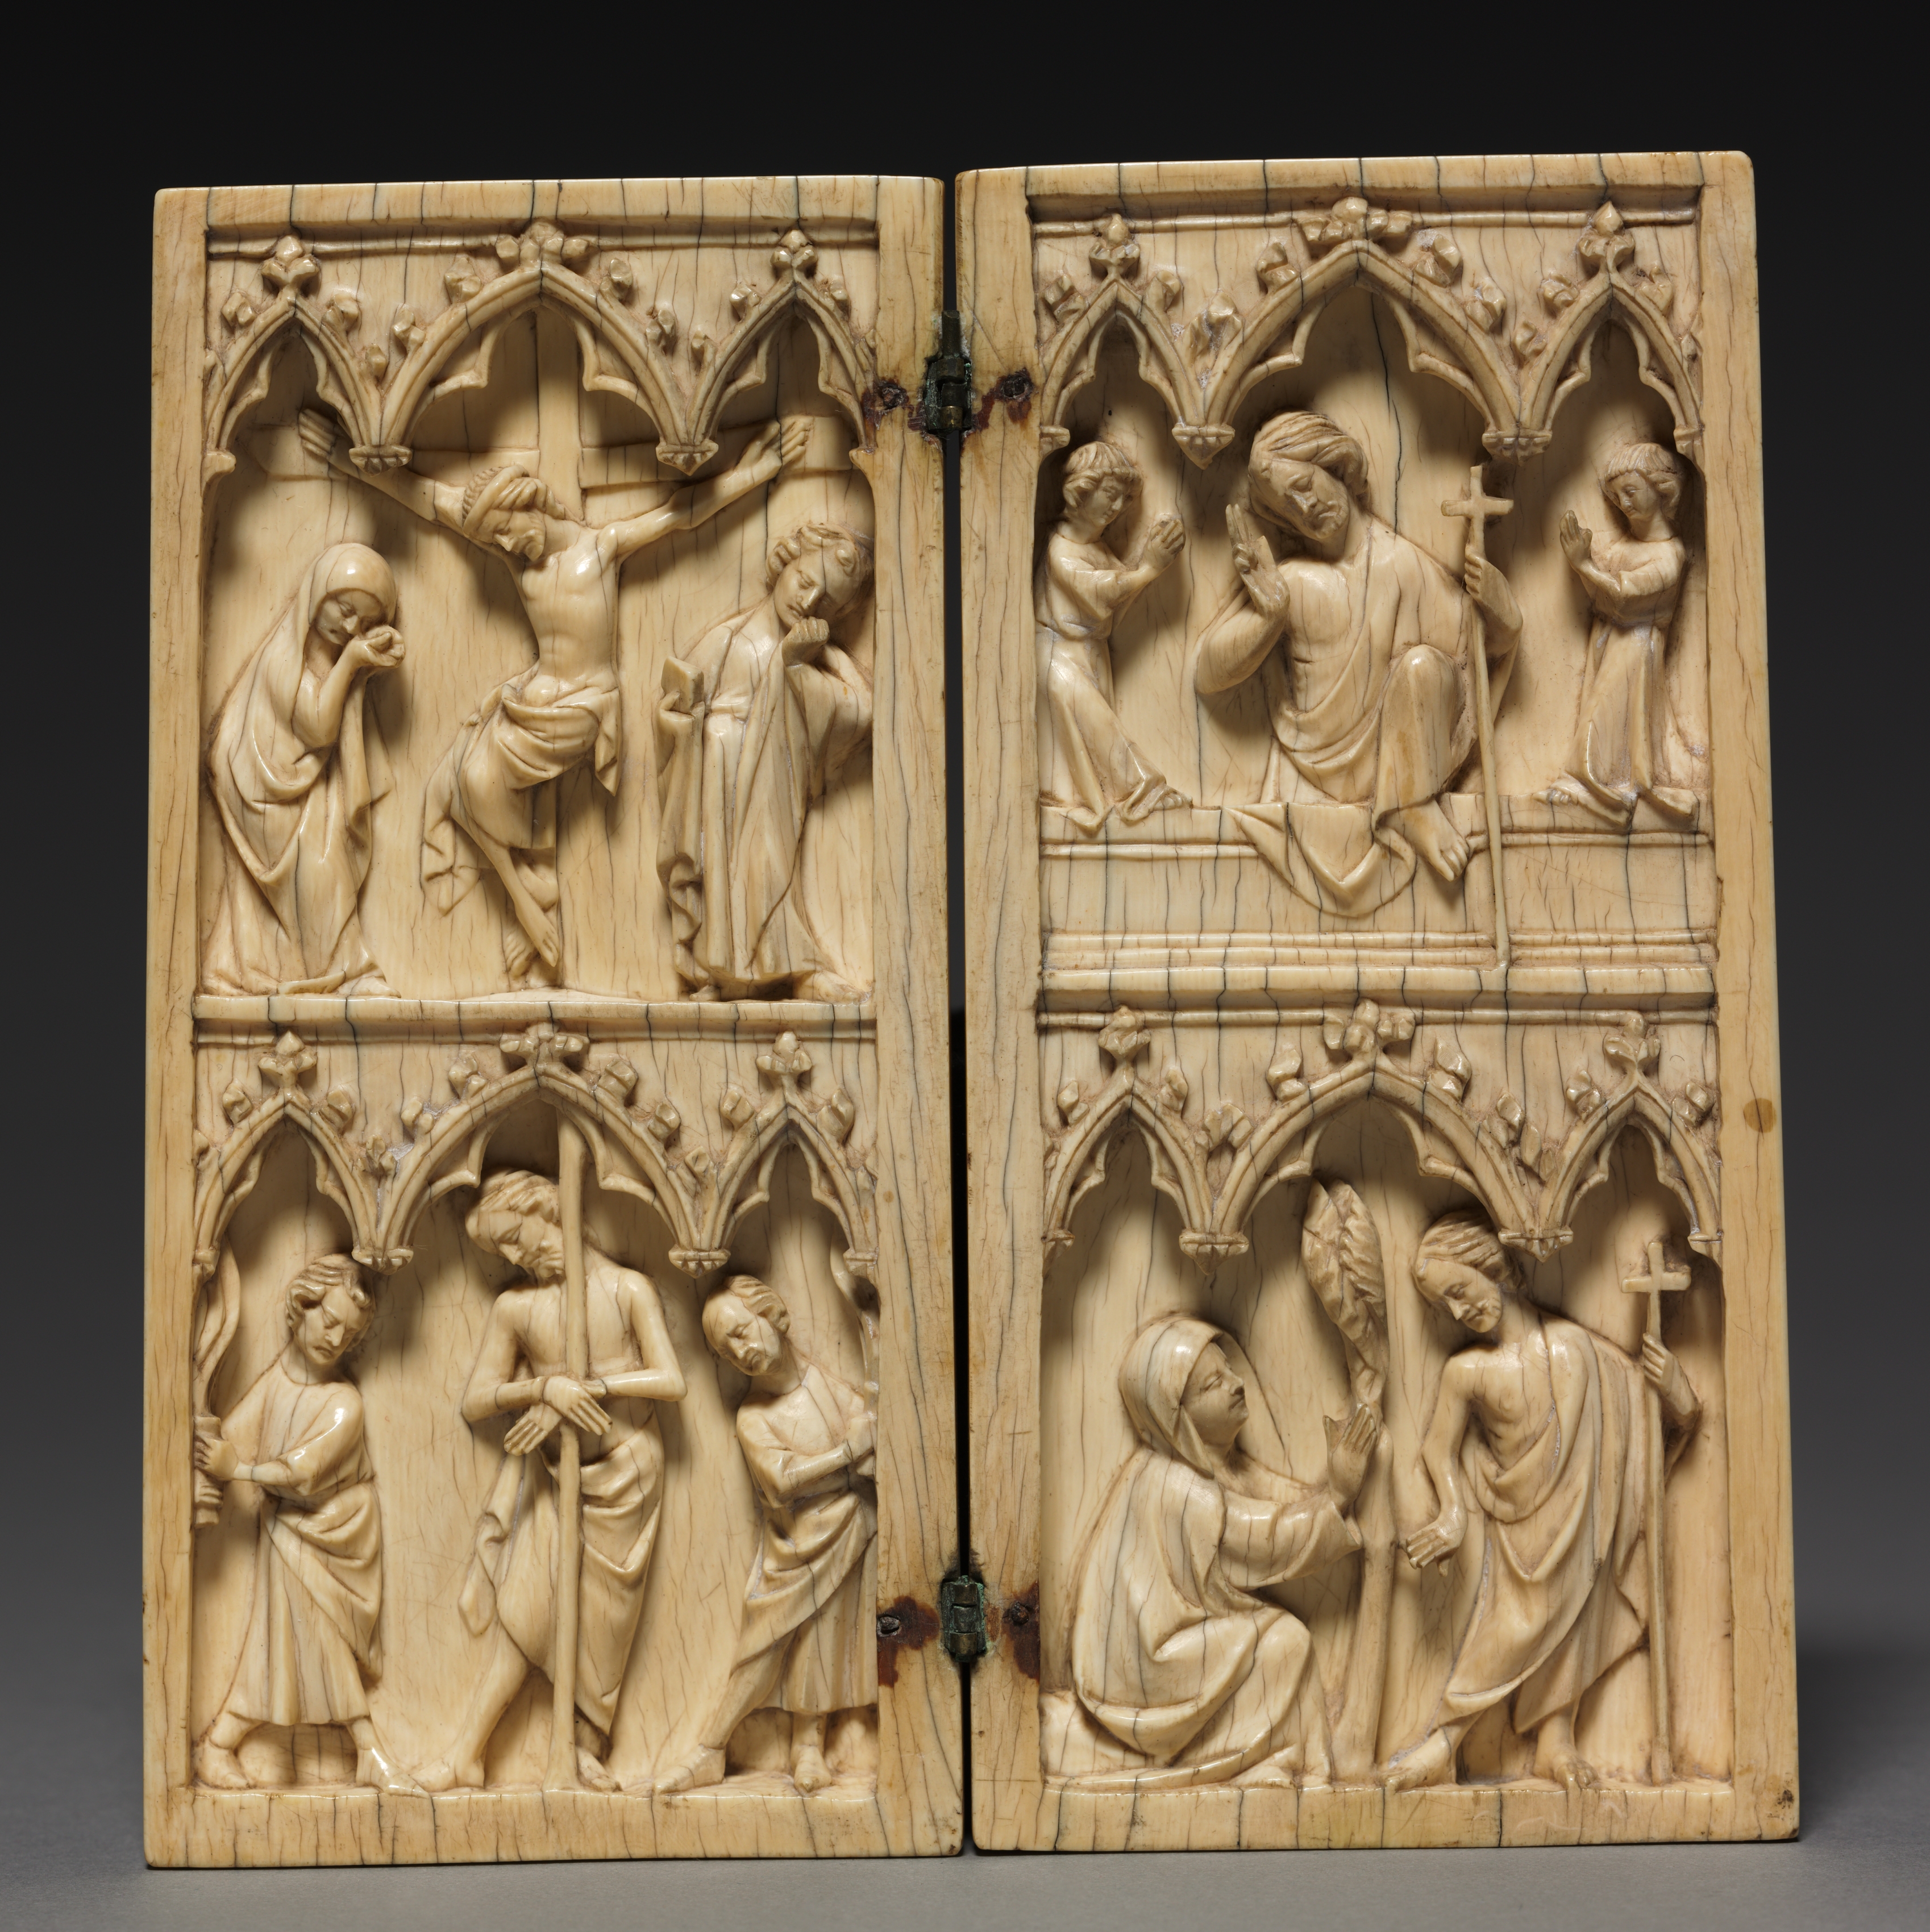 Diptych: Scenes from the Passion and Afterlife of Christ